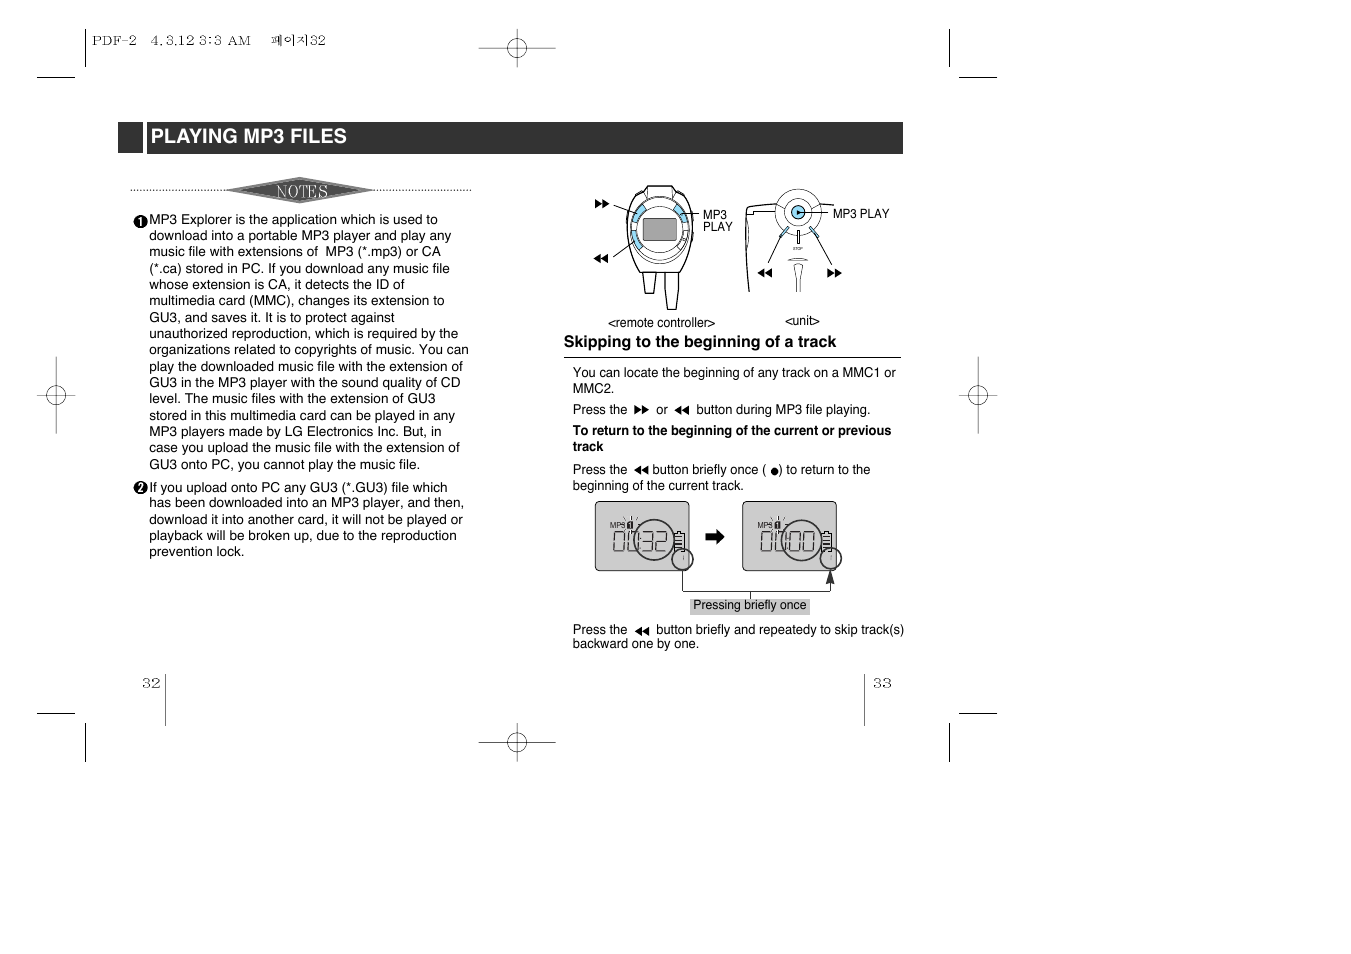 Playing mp3 files, Skipping to the beginning of a track | LG MF-PD330 User Manual | Page 17 / 20